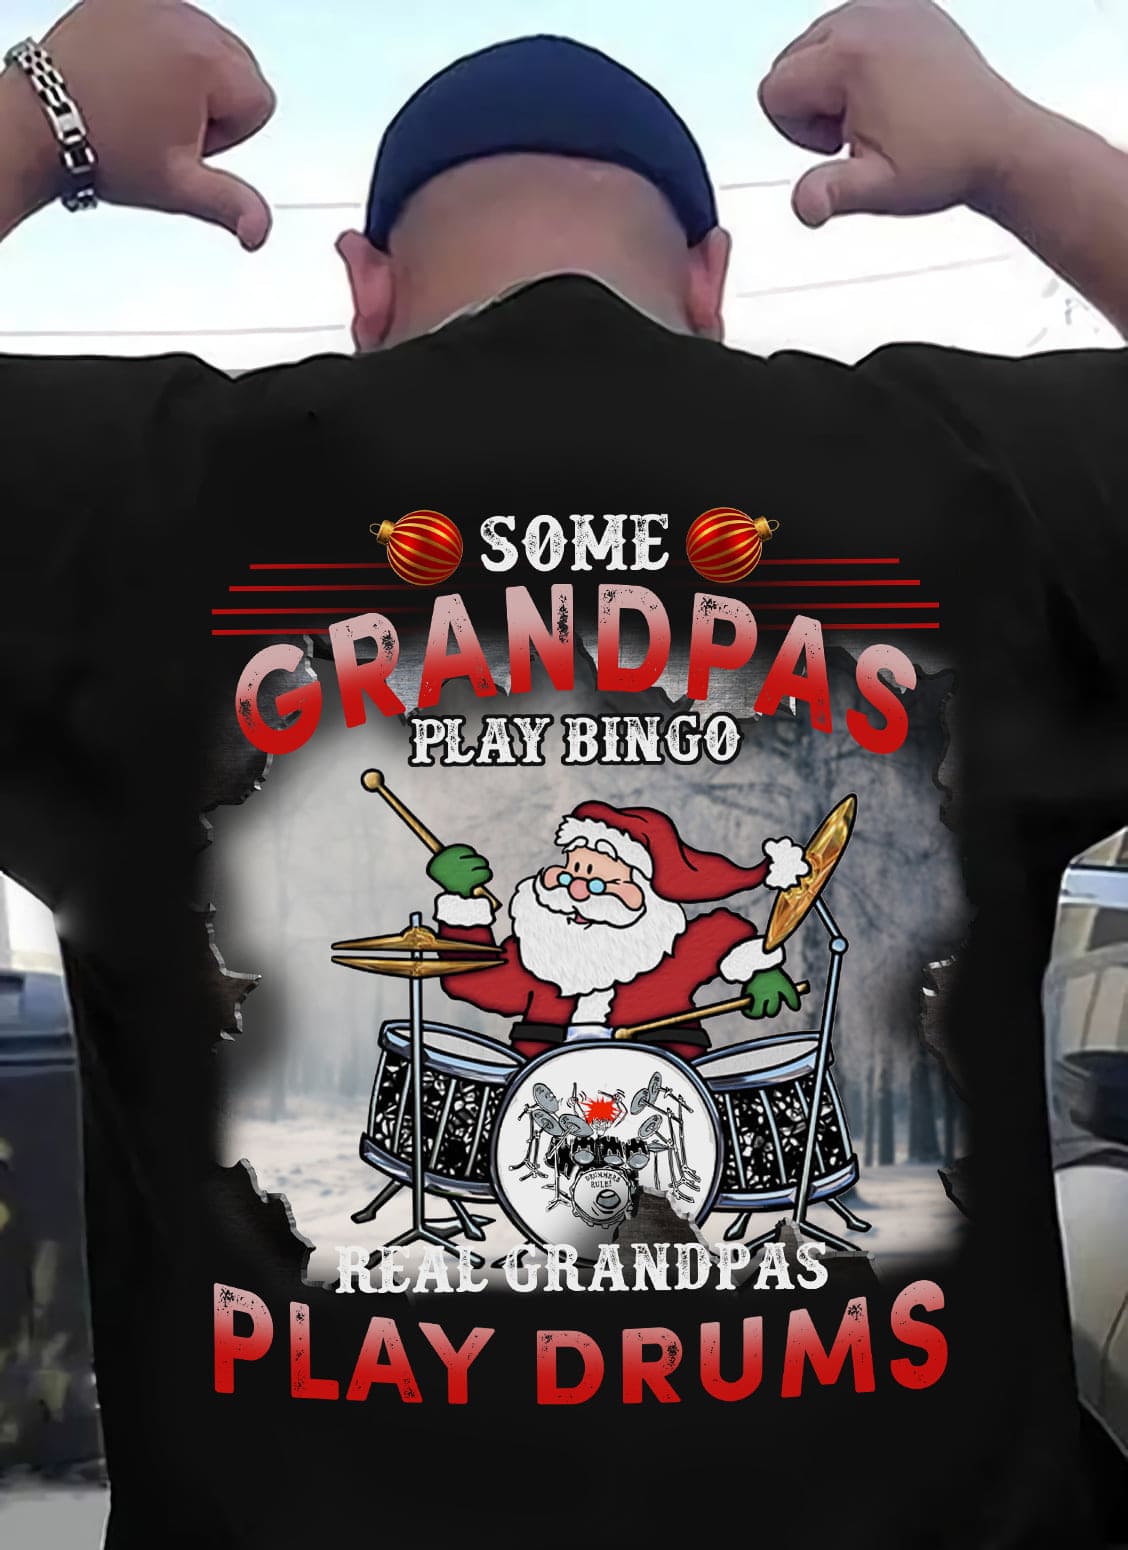 Some grandpas play bingo, real grandpas play drums - Santa Claus playing drums, Christmas day gift